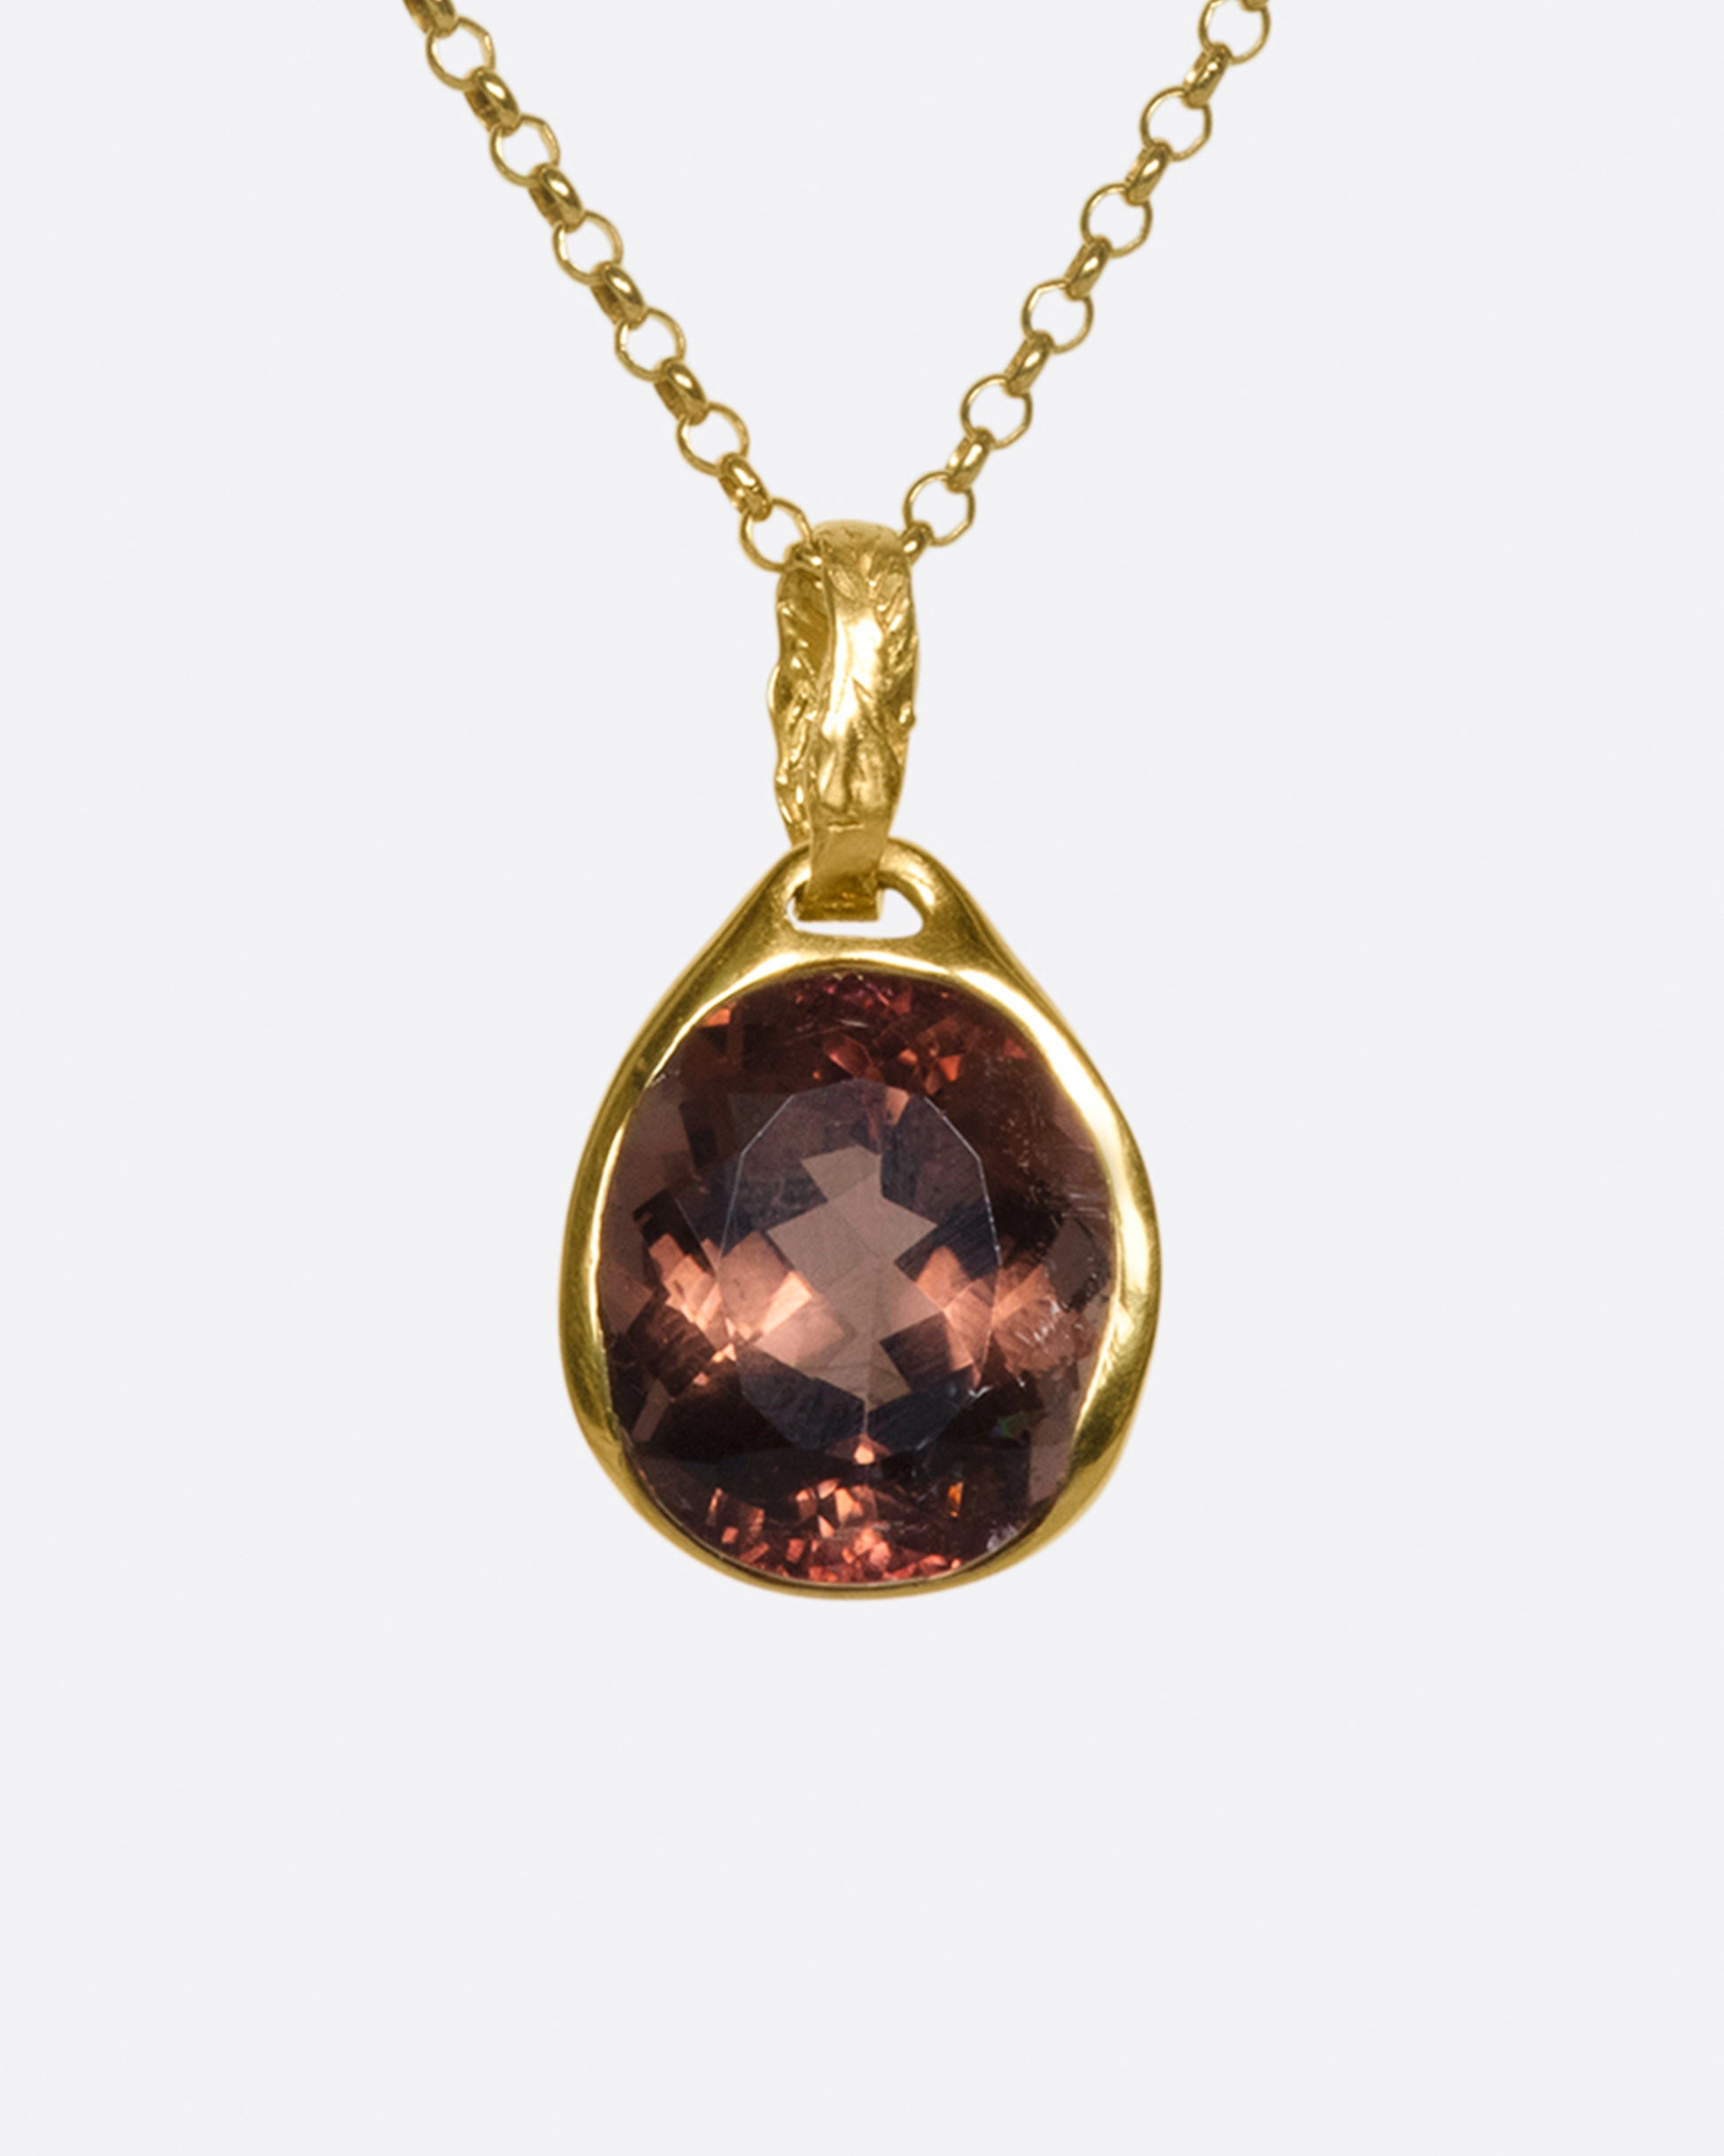 A faceted, reddish pink tourmaline pendant that can be worn facing either way to celebrate the glory of the stone.